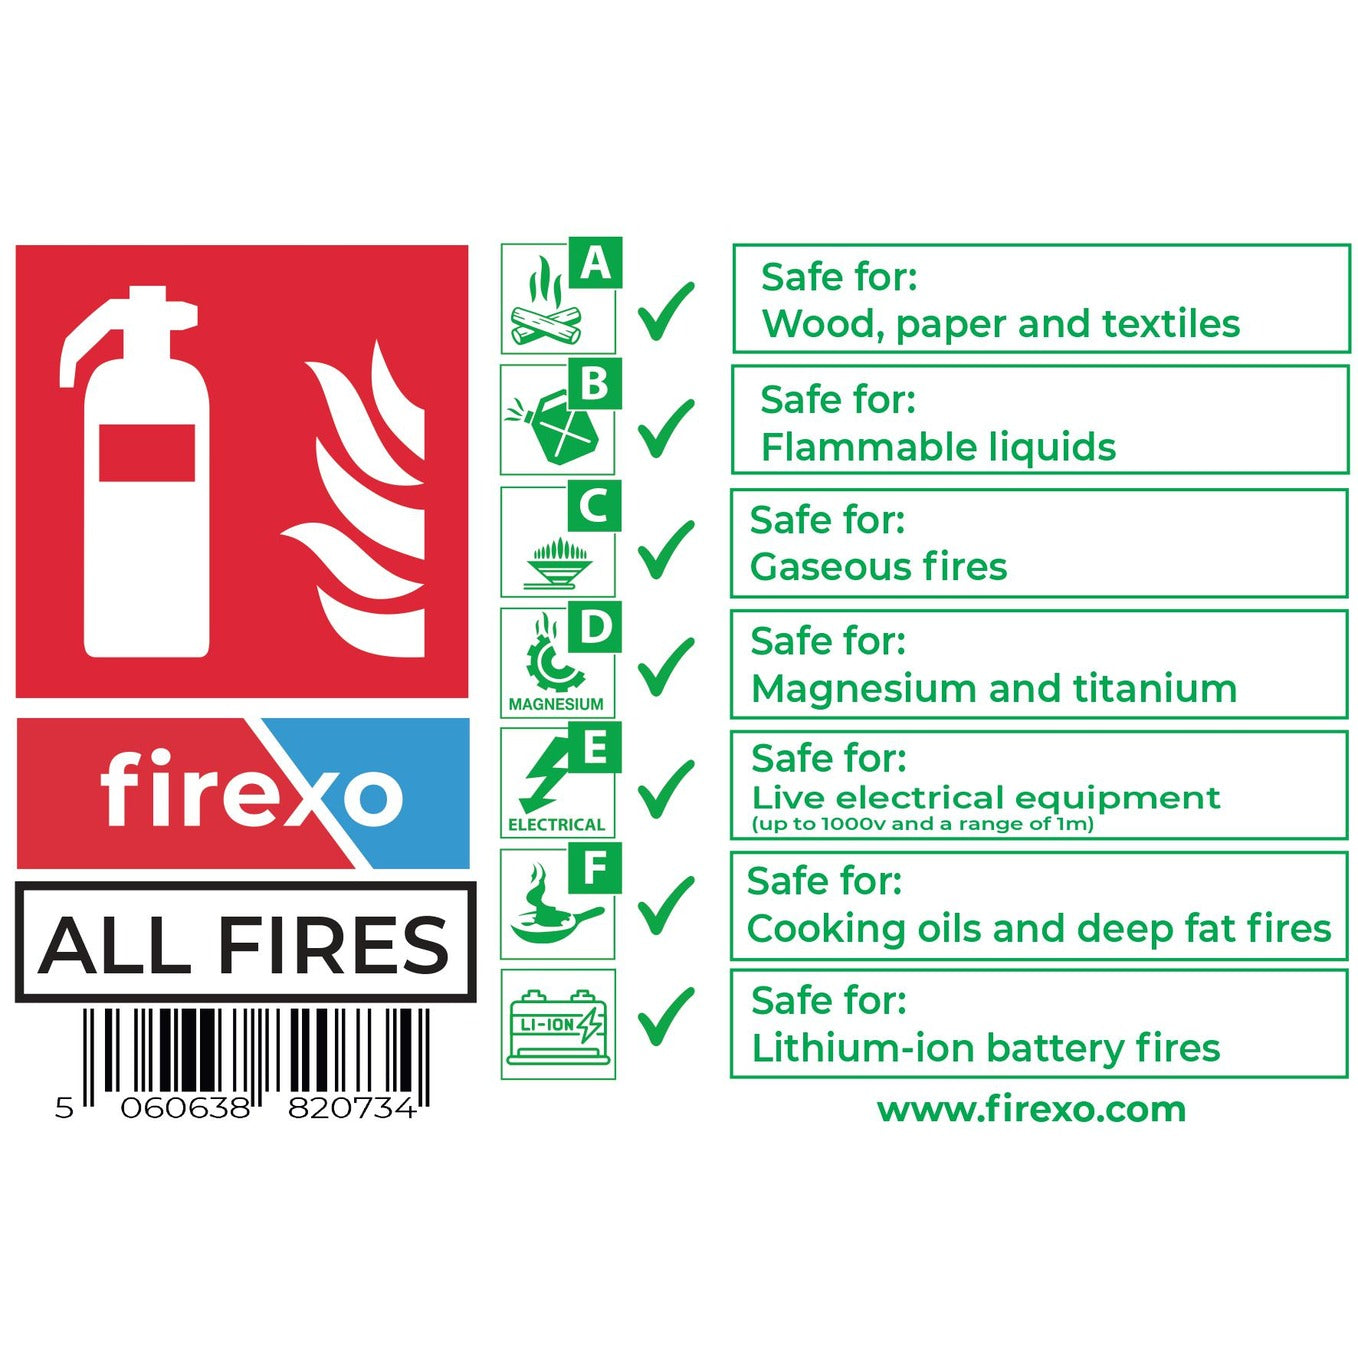 Non-Photoluminescent Extinguisher Sign for Firexo ALL FIRES Extinguishers